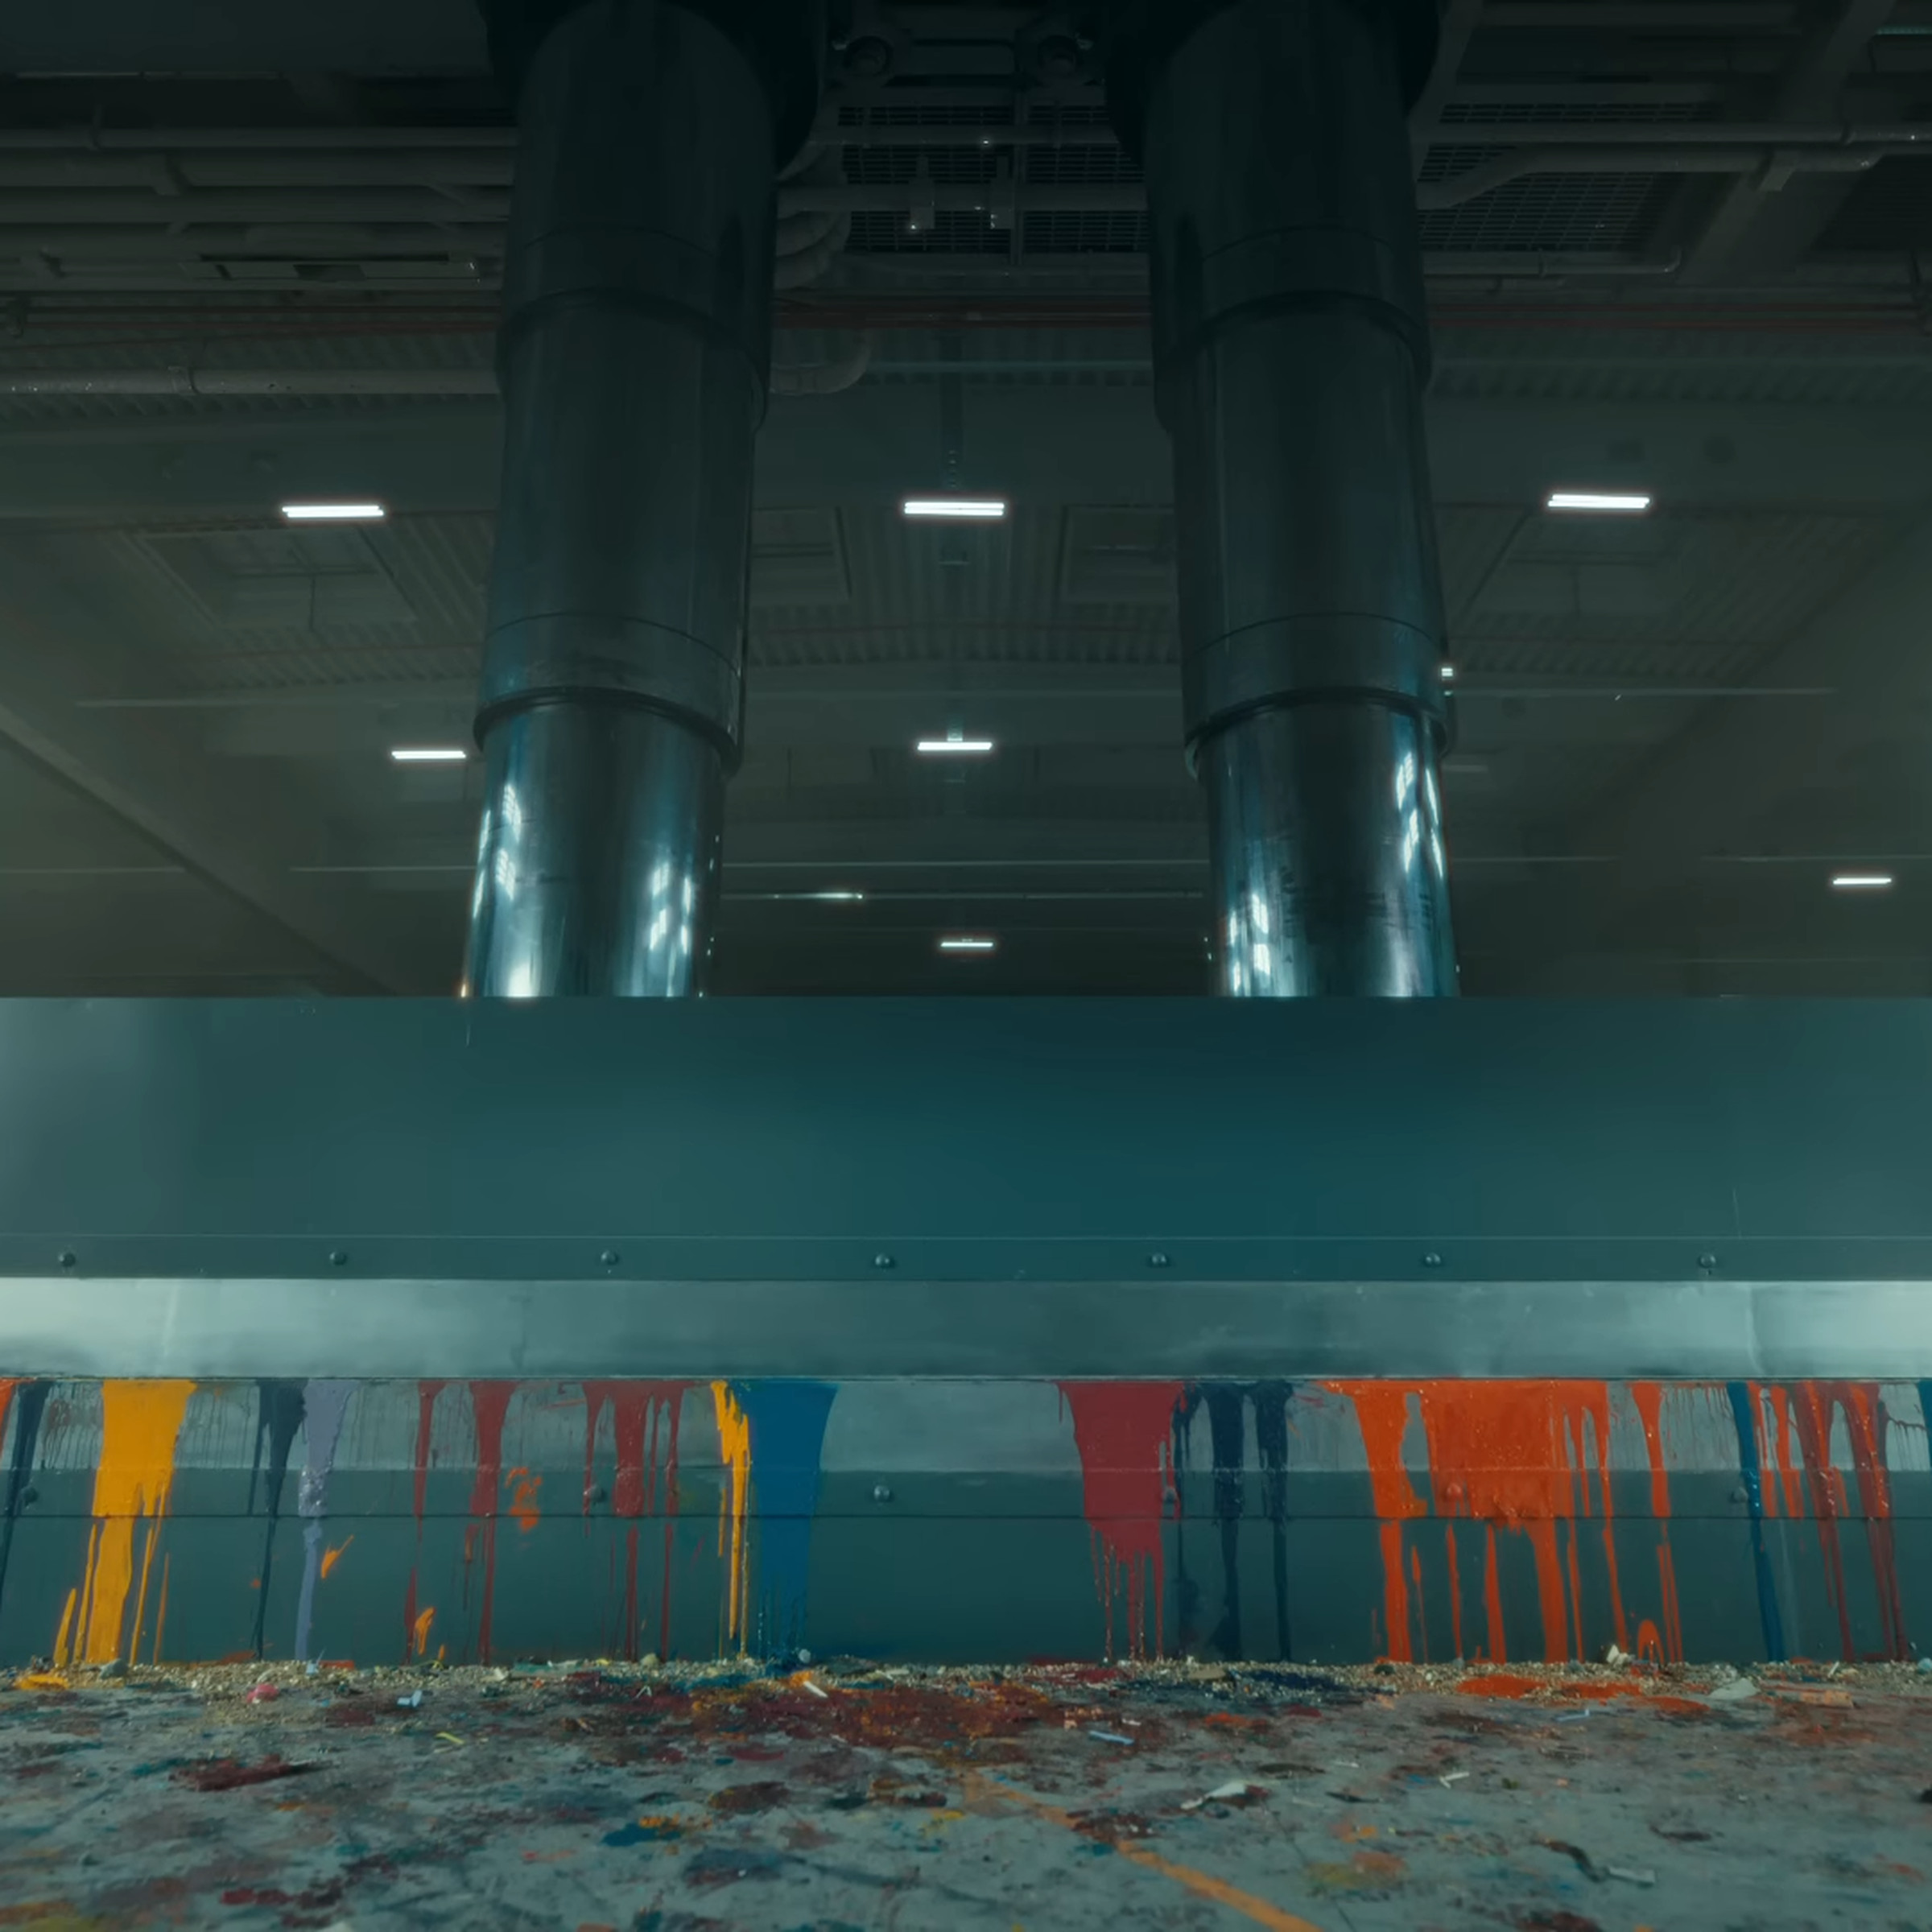 Still image from the “Crush” iPad ad with the press fully closed and only dripping paint and small debris visible outside.